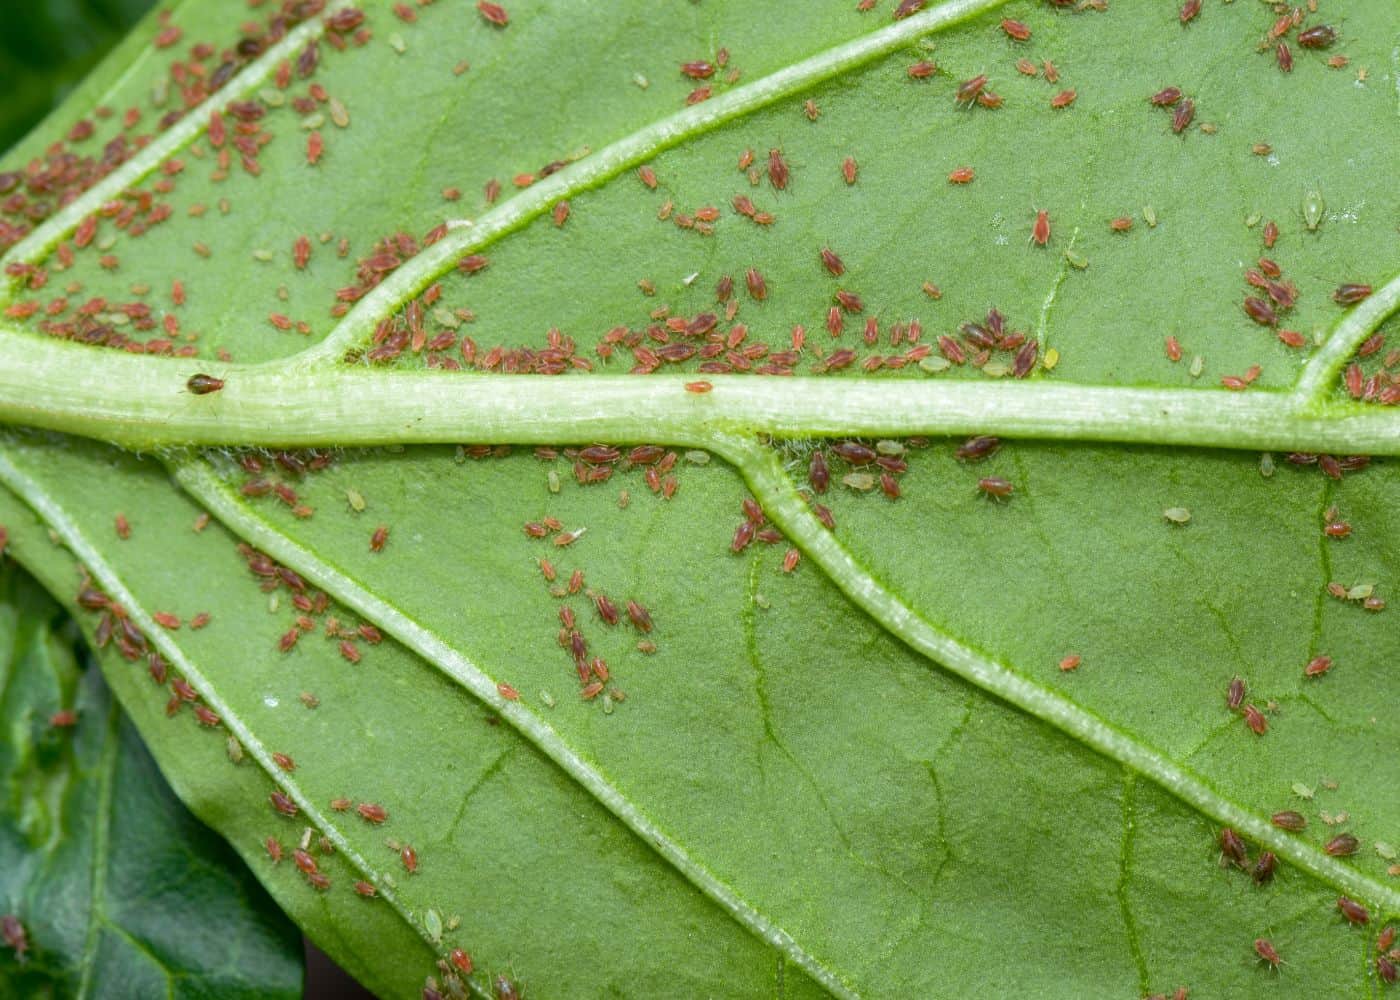 Aphids on plants